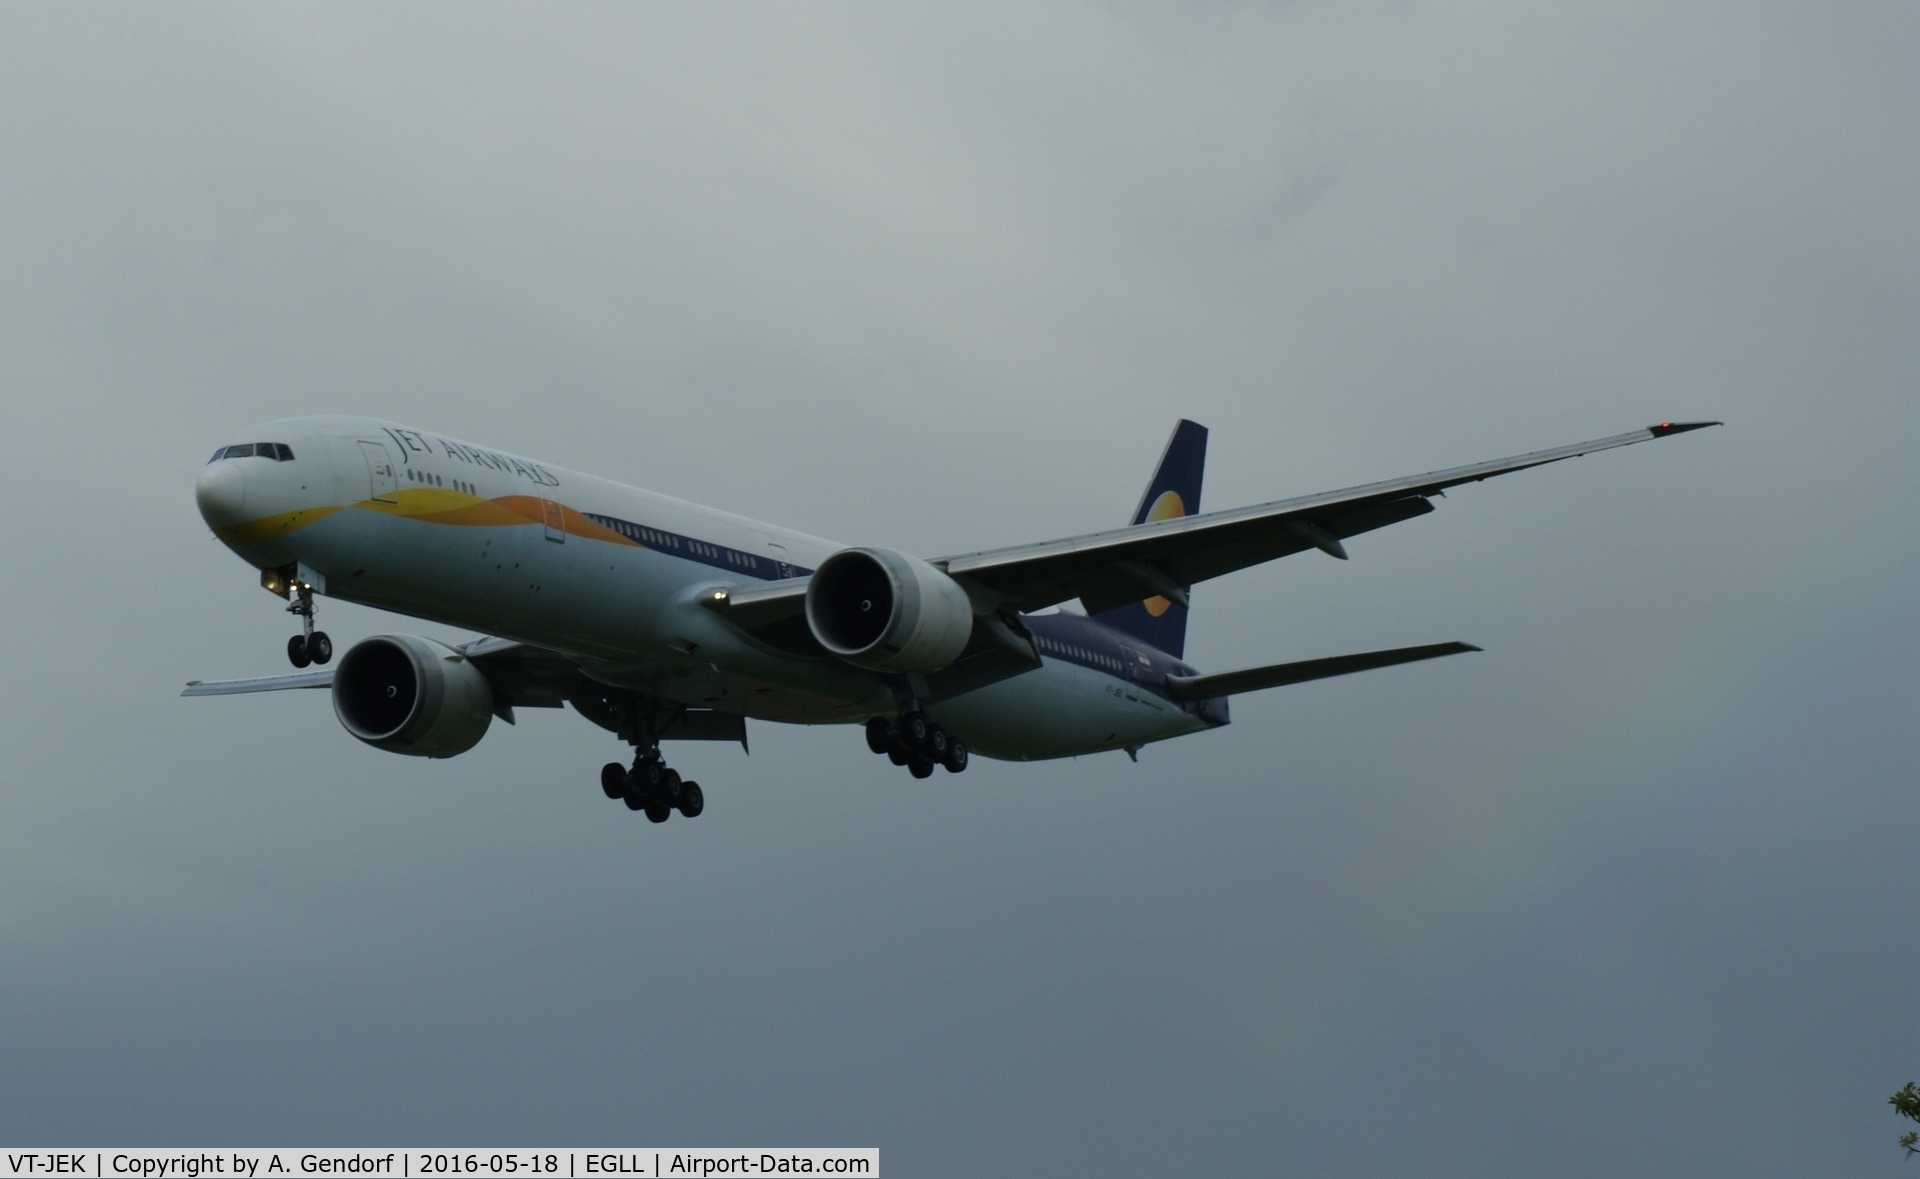 VT-JEK, 2008 Boeing 777-35R C/N 35165/696, Jet Airways, seen here landing at London Heathrow(EGLL), note the thin rainbow on the right of the picture